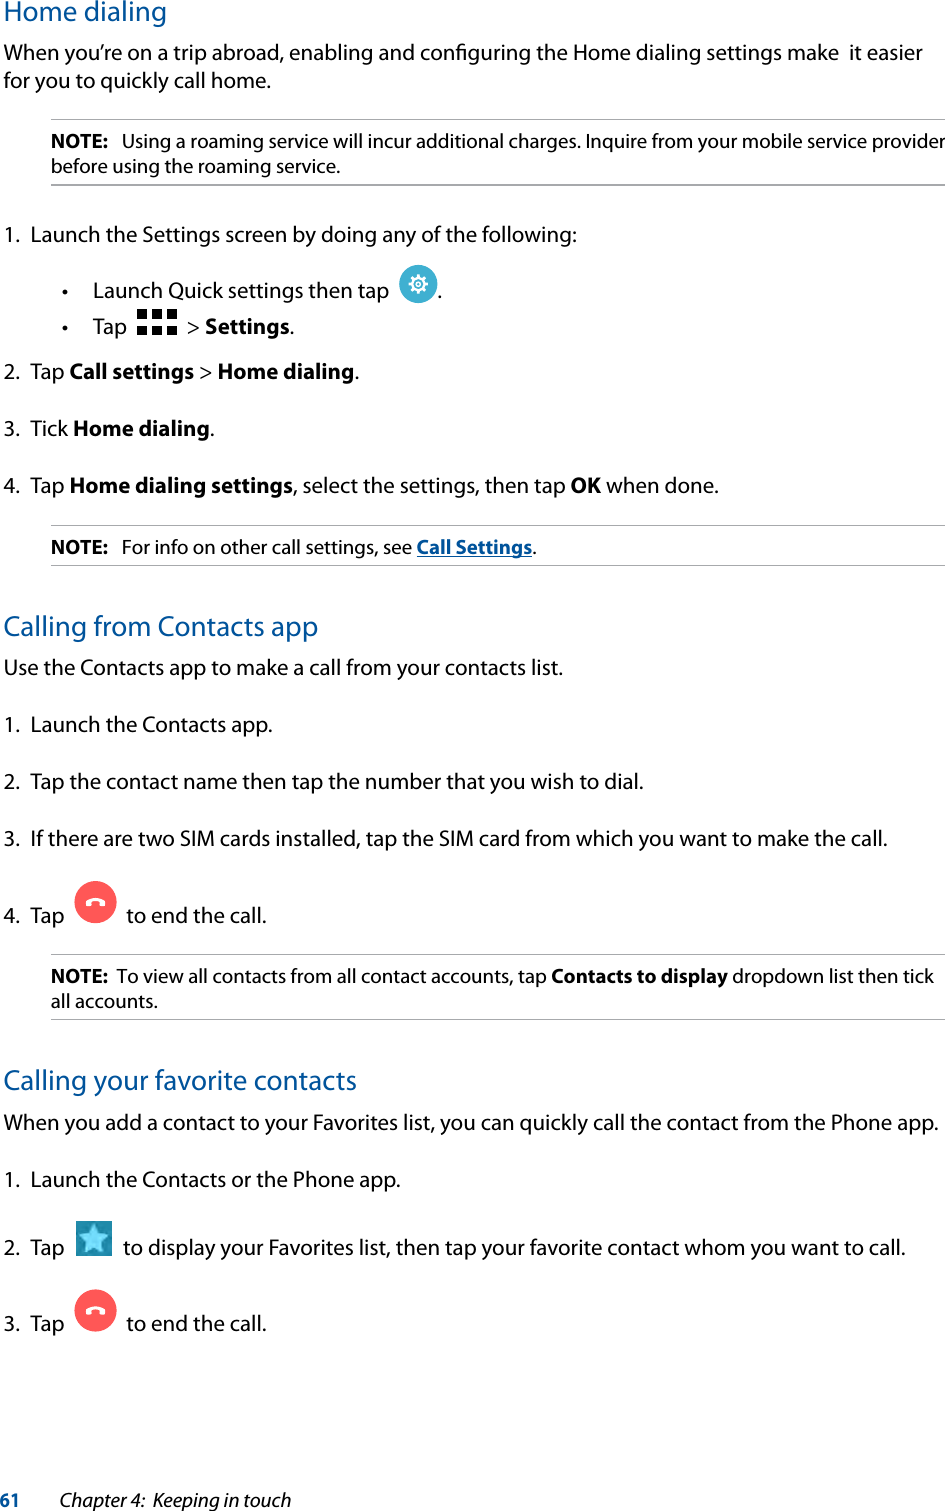 61Chapter 4:  Keeping in touchHome dialingWhen you’re on a trip abroad, enabling and conﬁguring the Home dialing settings make  it easier for you to quickly call home.NOTE:  Using a roaming service will incur additional charges. Inquire from your mobile service provider before using the roaming service.1.  Launch the Settings screen by doing any of the following: •Launch Quick settings then tap   .   •Tap     &gt; Settings.2. Tap Call settings &gt; Home dialing.3. Tick Home dialing.4. Tap Home dialing settings, select the settings, then tap OK when done.NOTE:  For info on other call settings, see Call Settings.Calling from Contacts appUse the Contacts app to make a call from your contacts list.1.  Launch the Contacts app.2.  Tap the contact name then tap the number that you wish to dial.3.  If there are two SIM cards installed, tap the SIM card from which you want to make the call.4.  Tap     to end the call.NOTE:  To view all contacts from all contact accounts, tap Contacts to display dropdown list then tick all accounts.Calling your favorite contactsWhen you add a contact to your Favorites list, you can quickly call the contact from the Phone app.1.  Launch the Contacts or the Phone app.2.  Tap     to display your Favorites list, then tap your favorite contact whom you want to call.3.  Tap     to end the call.